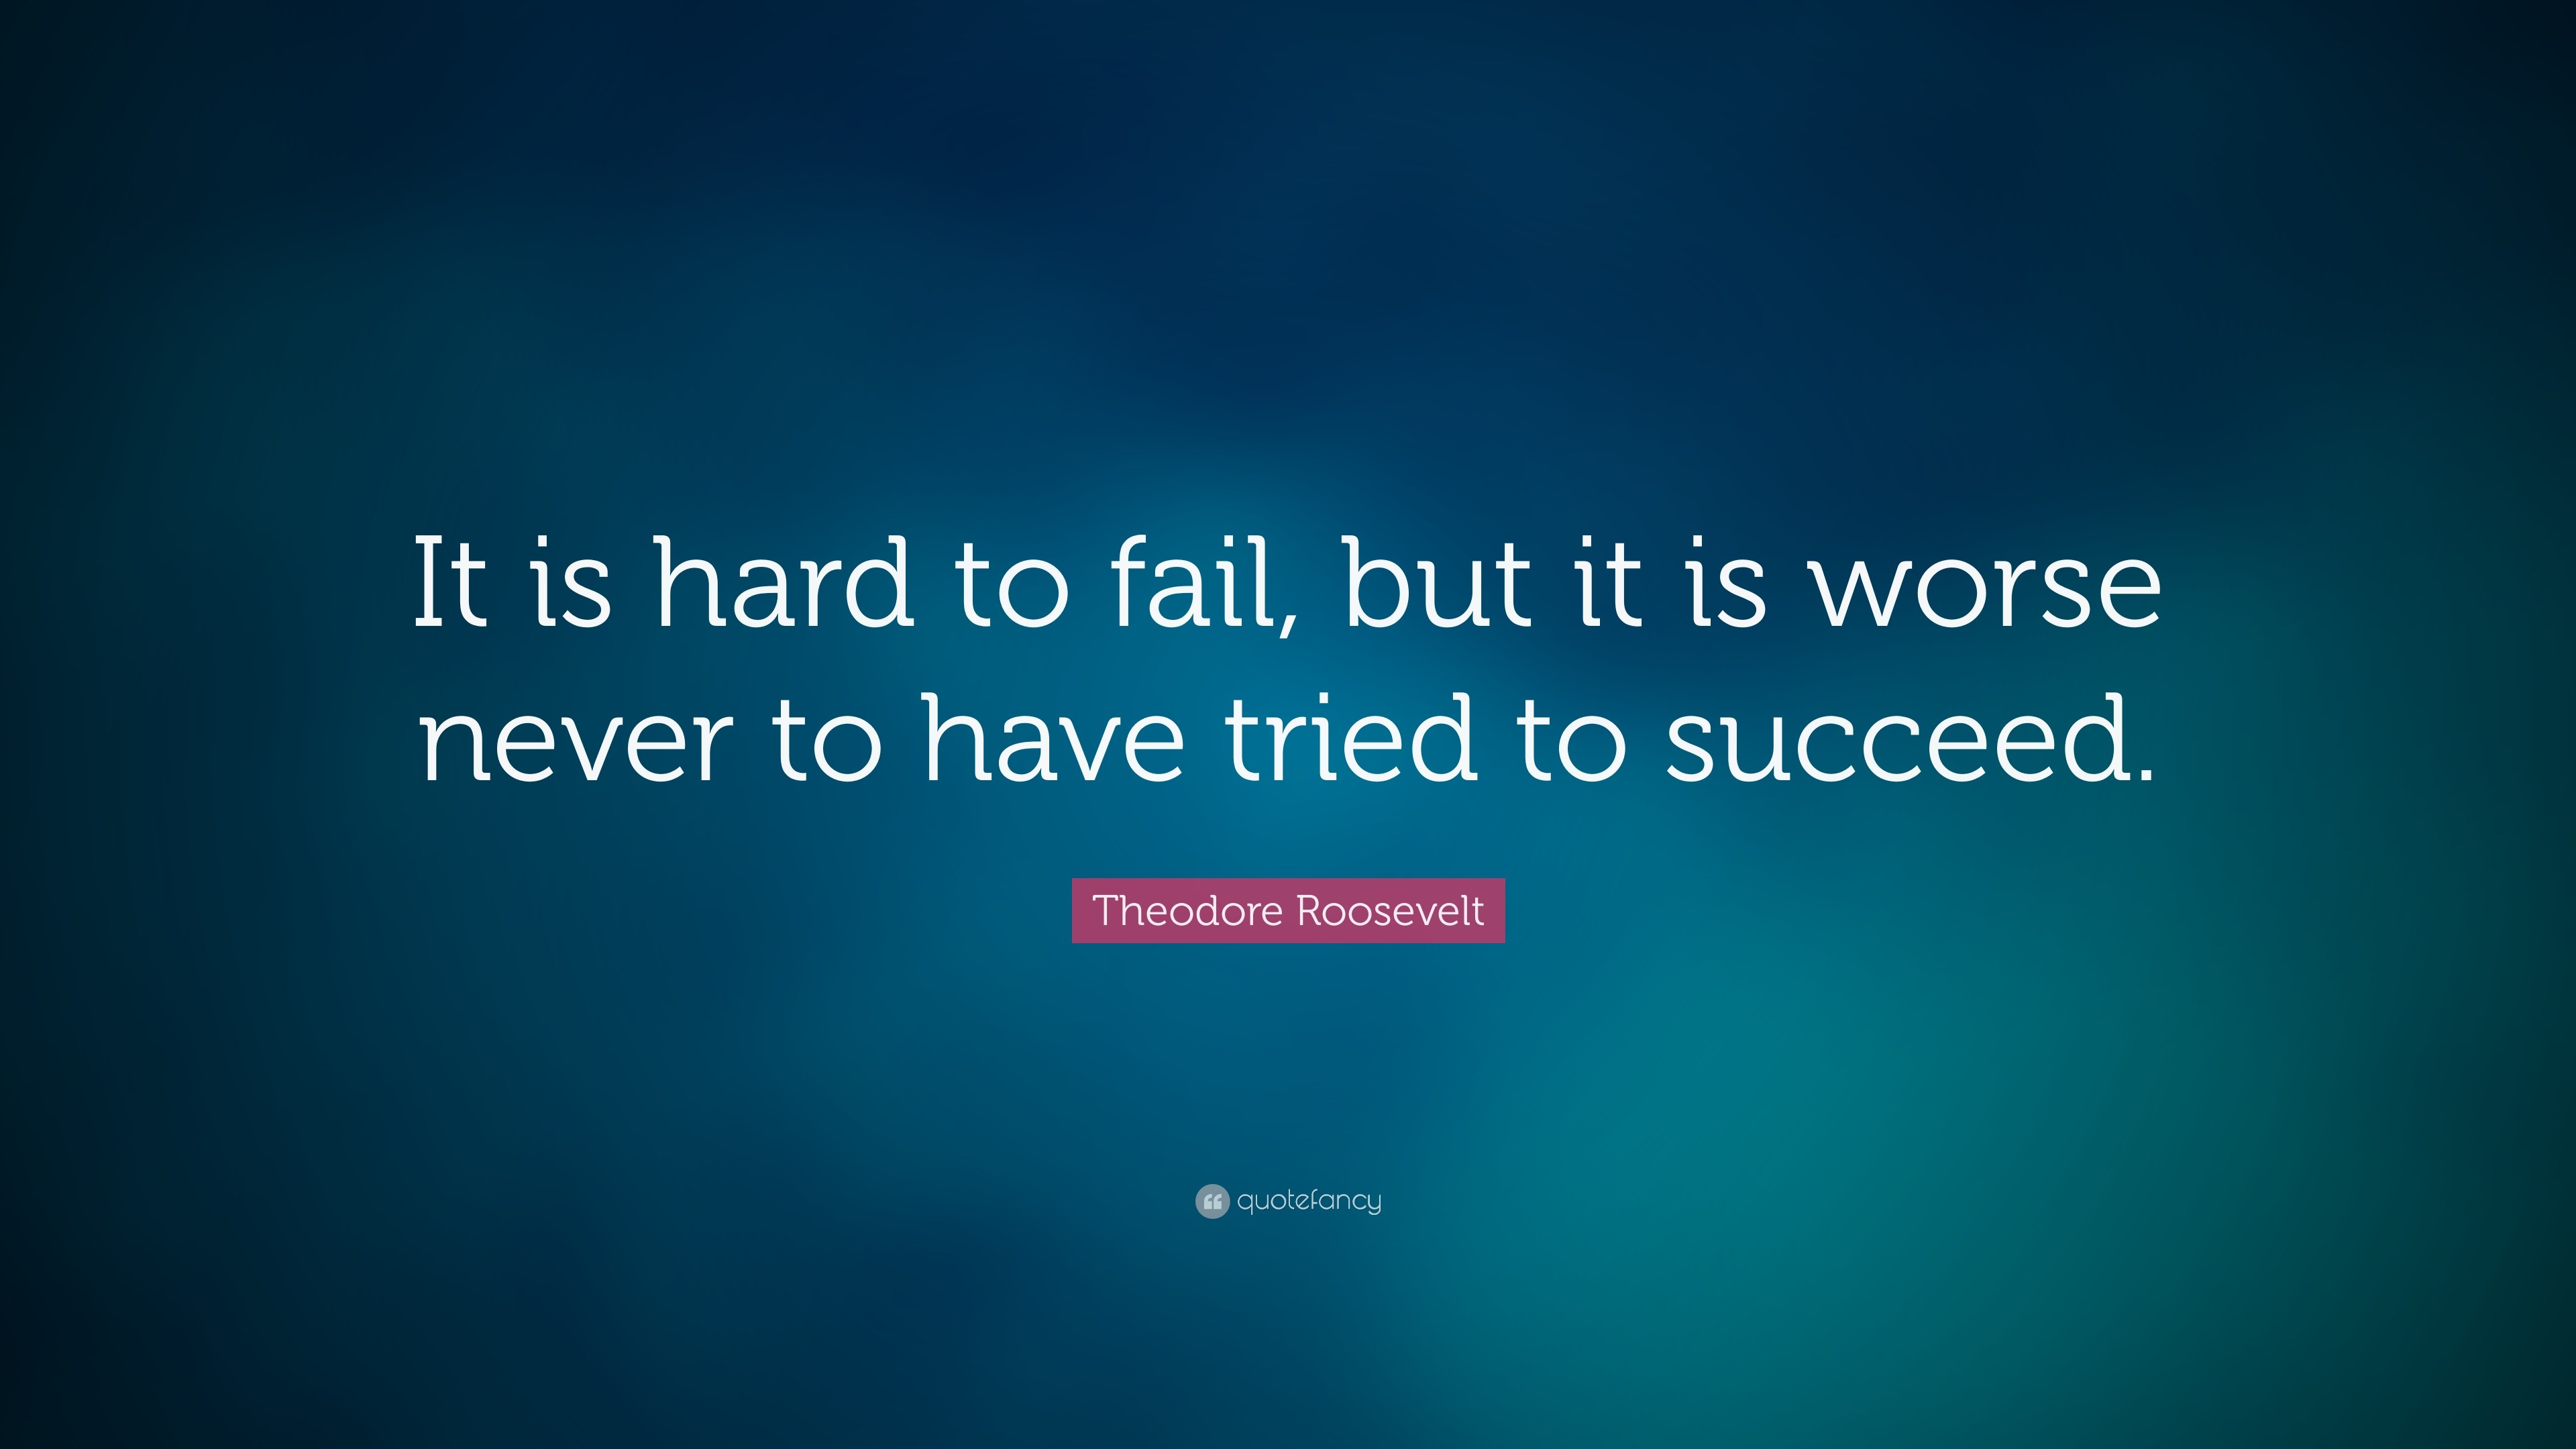 Theodore Roosevelt Quote: “It is hard to fail, but it is worse never to ...